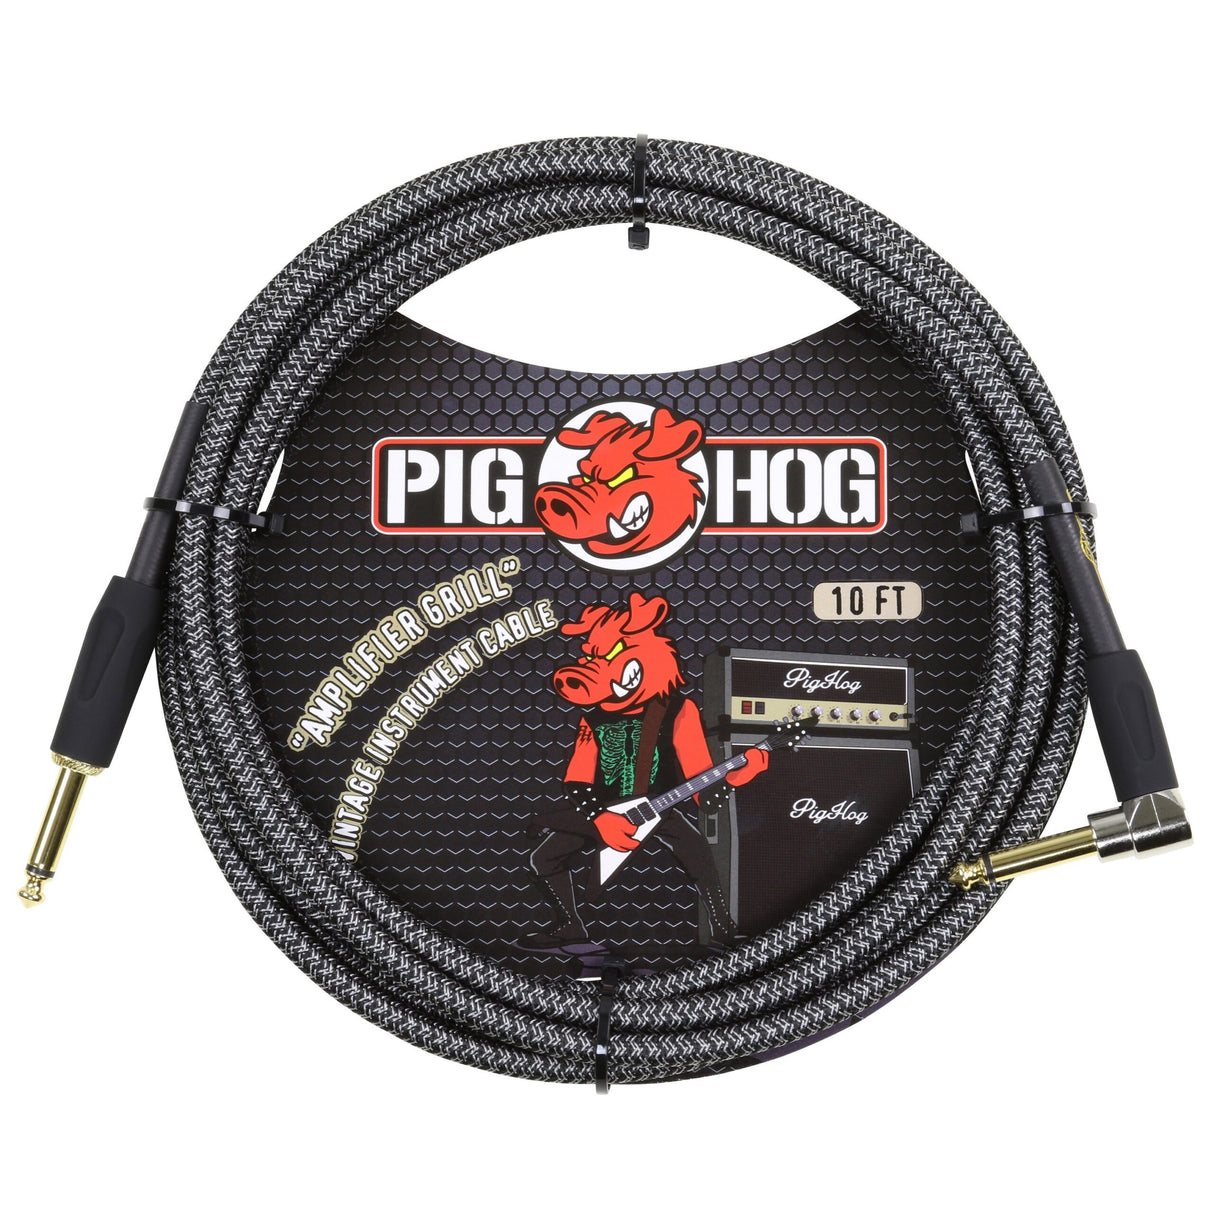 Pig Hog PCH10AGR "Amplifier Grill" Instrument Cable, 10ft. Right Angle